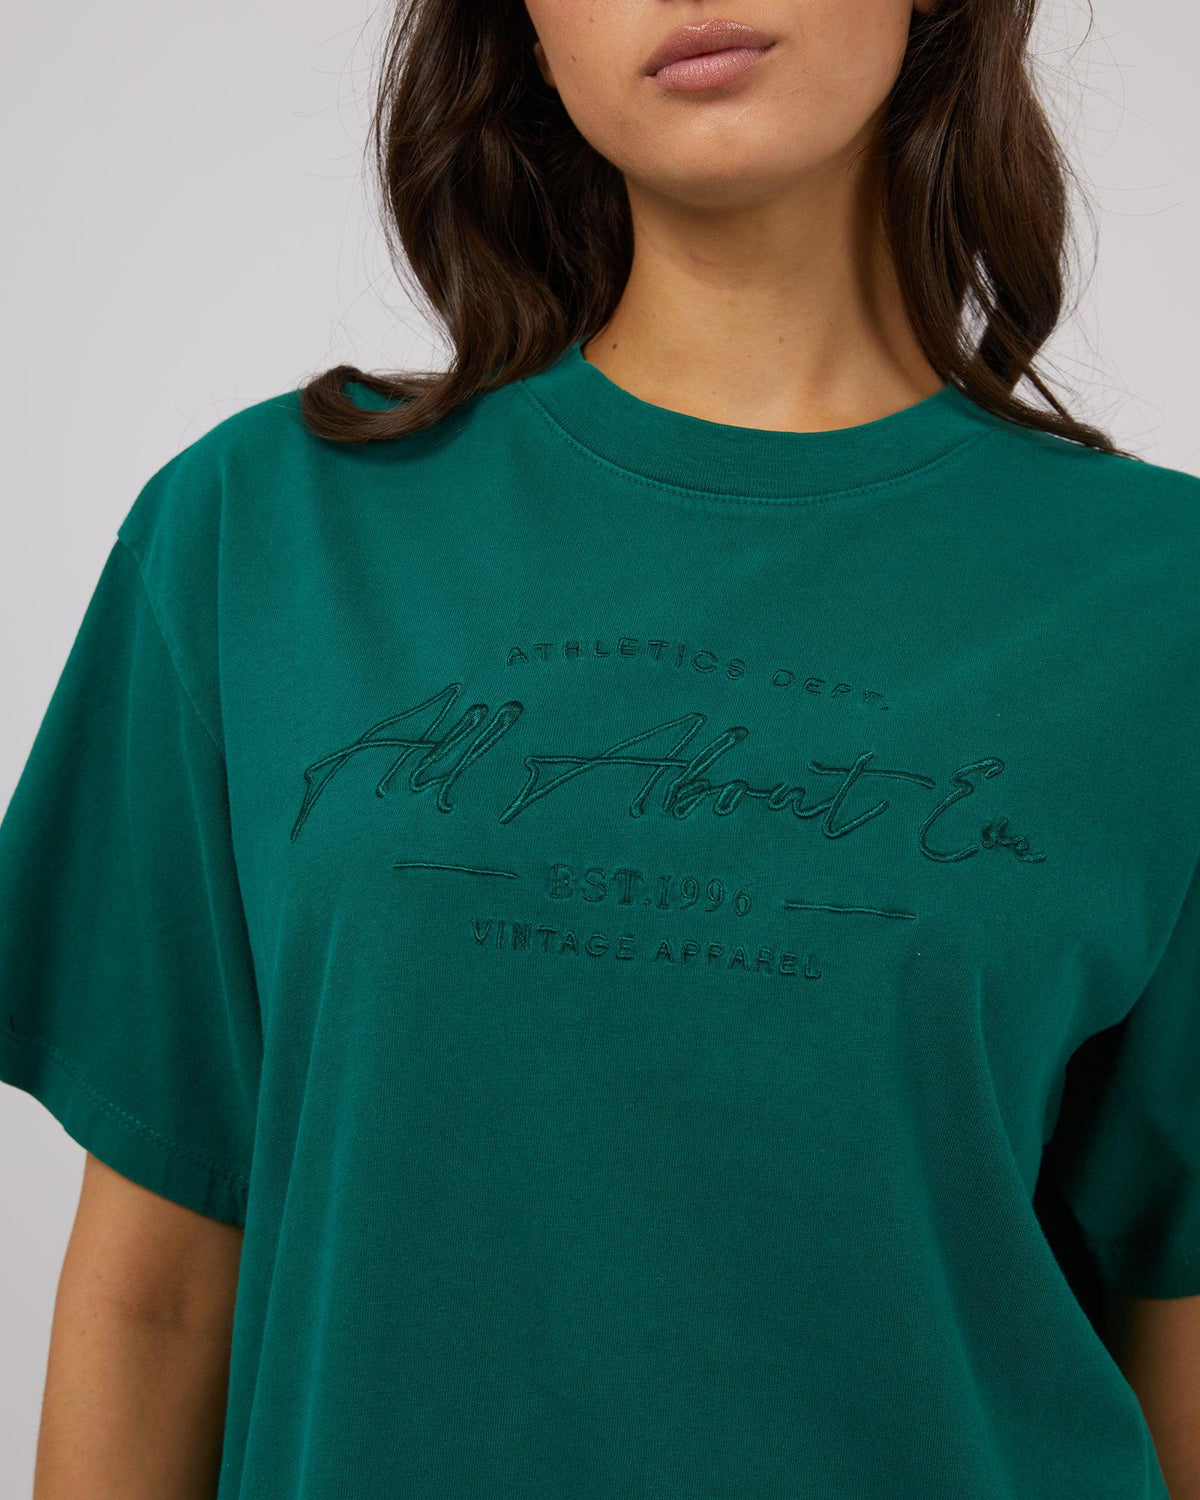 All About Eve-Classic Tee Emerald-Edge Clothing